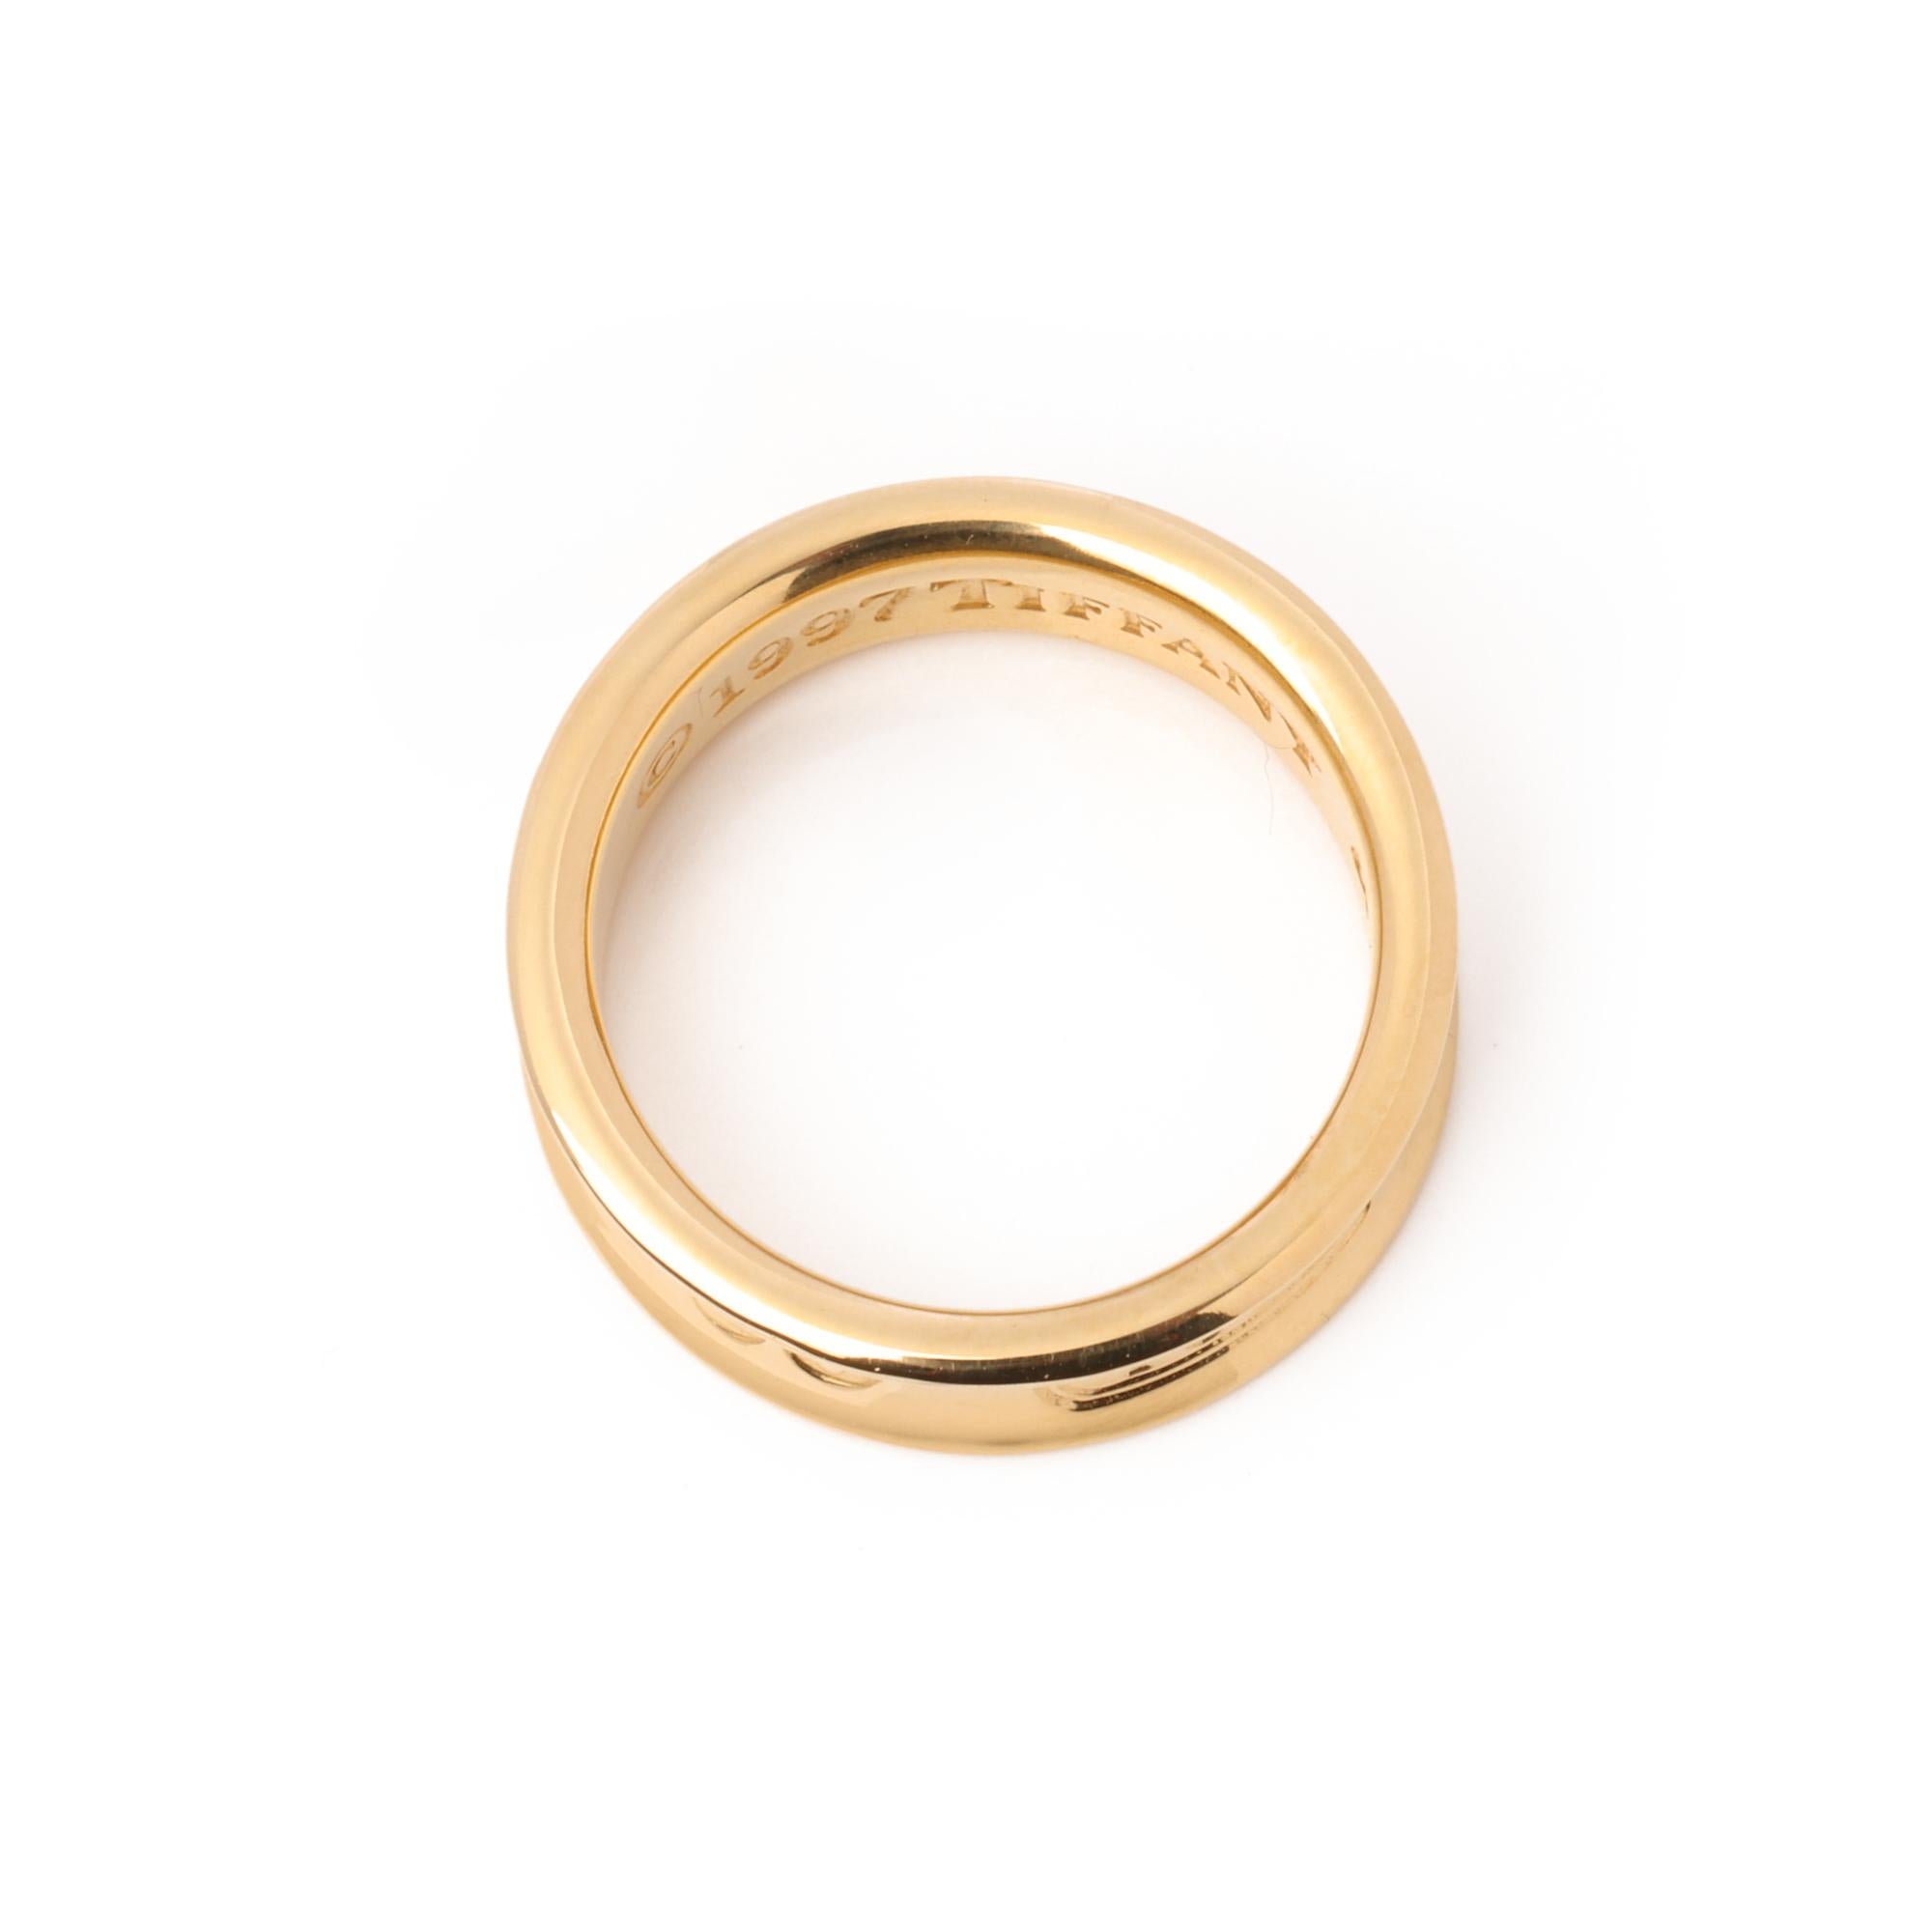 This ring by Tiffany & Co is from their 1837 collection and features a contoured design in 18ct yellow gold. 